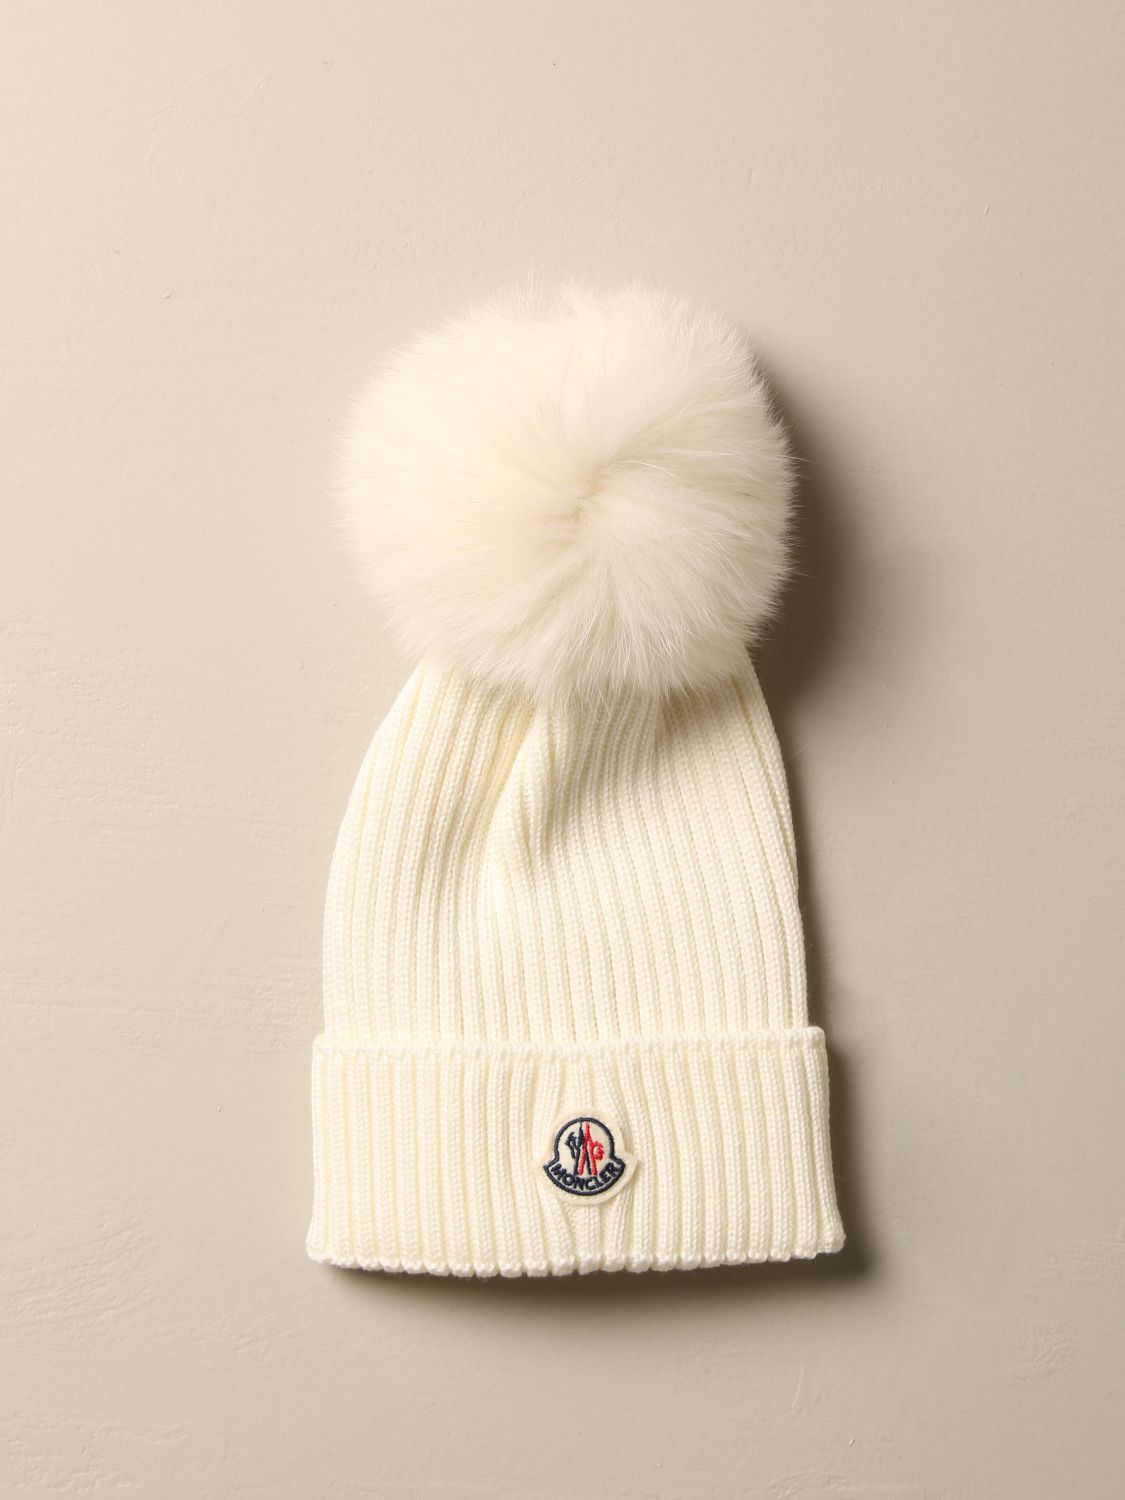 Moncler wool hat with maxi pompom | Hat Girl Moncler Kids White | Hat